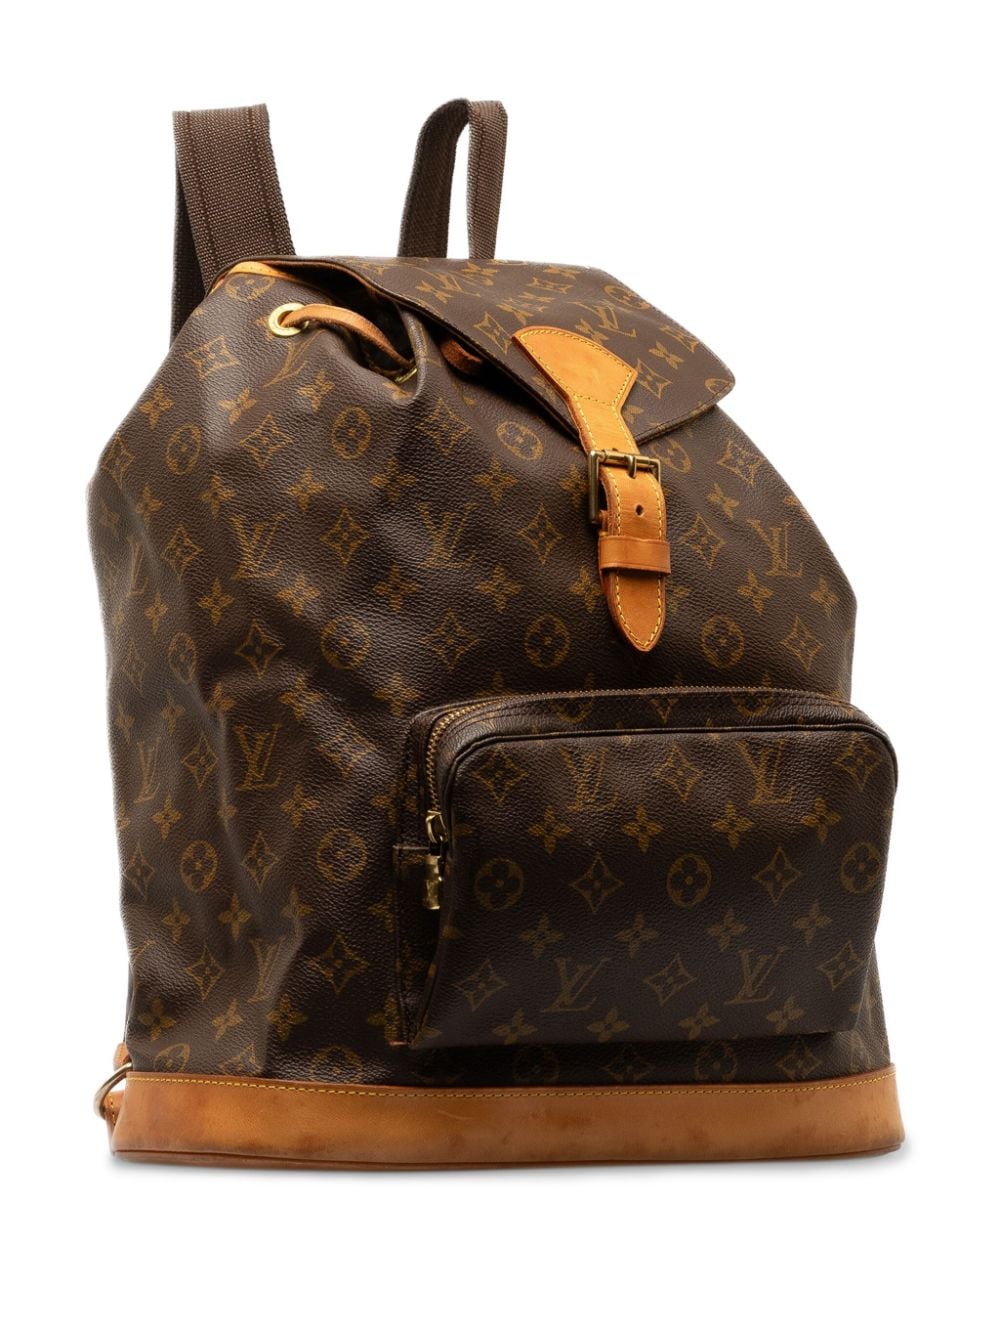 Pre-owned Louis Vuitton Montsouris Gm 双肩包（1995年典藏款） In Brown